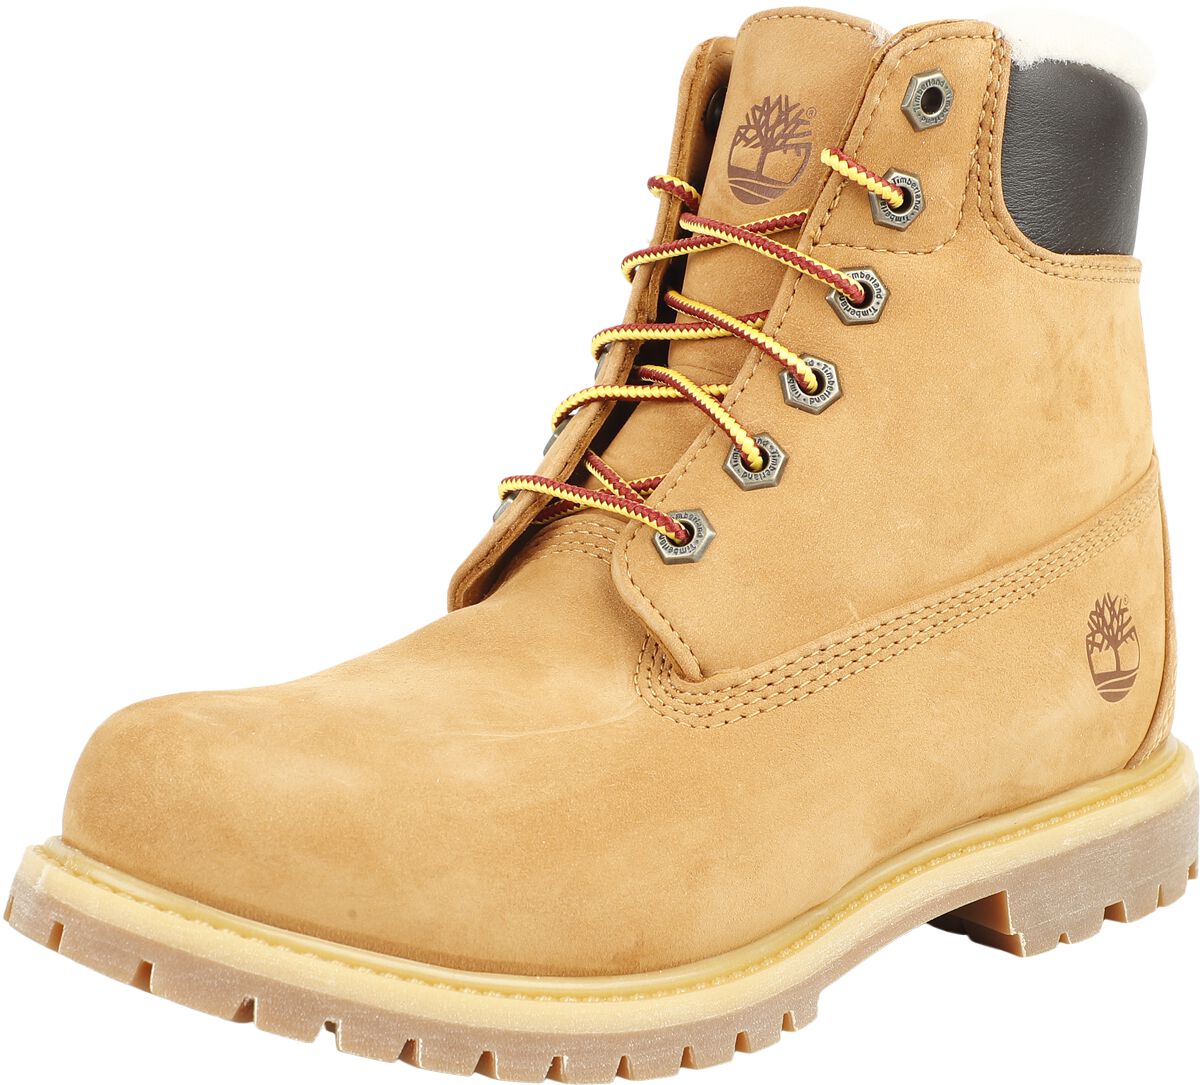 Timberland 6 Inch Premium Shearling Lined WP Boot Boot braun in EU41 von Timberland